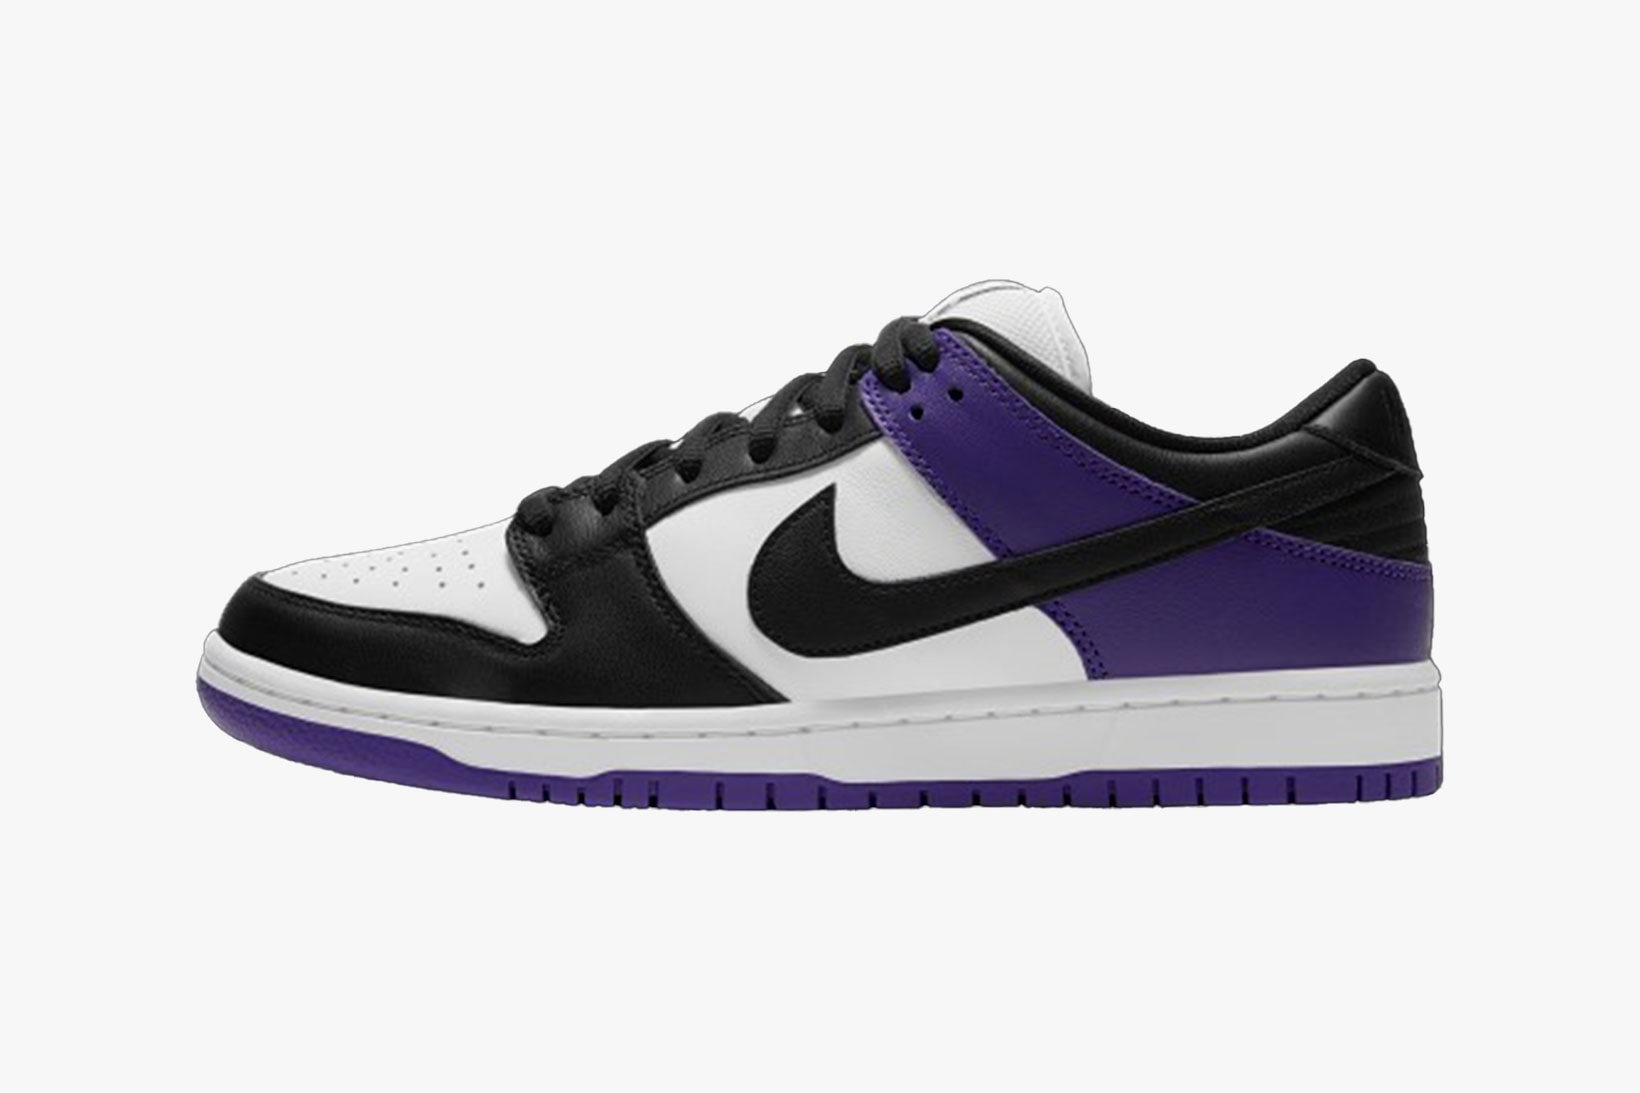 nike sb dunk low court purple black white sneakers official look release laterals